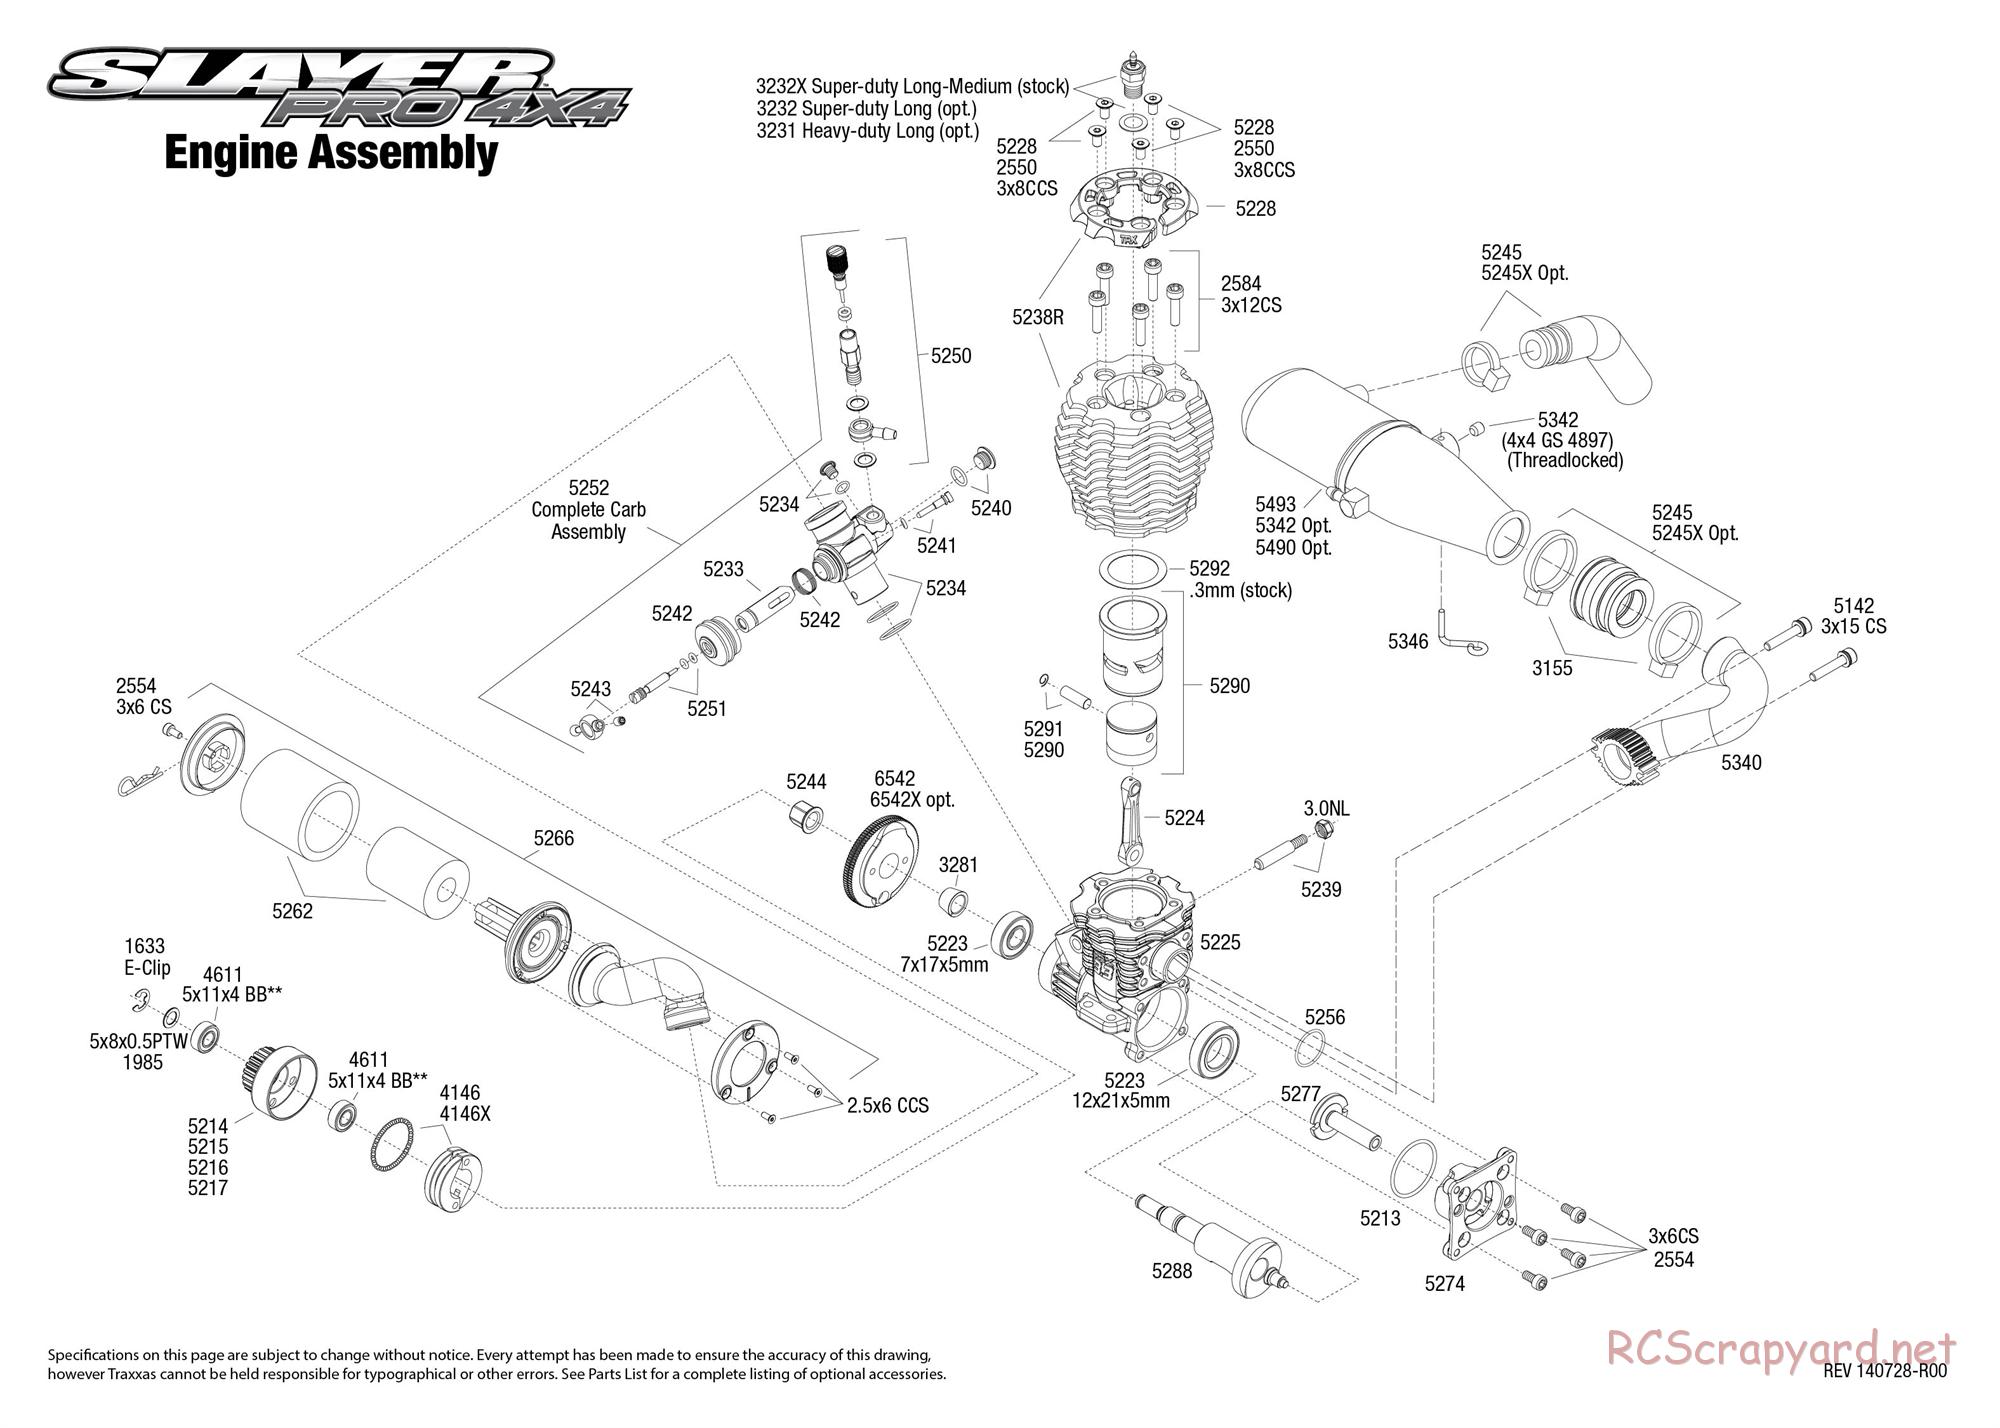 Traxxas - Slayer Pro 4x4 (2014) - Exploded Views - Page 3